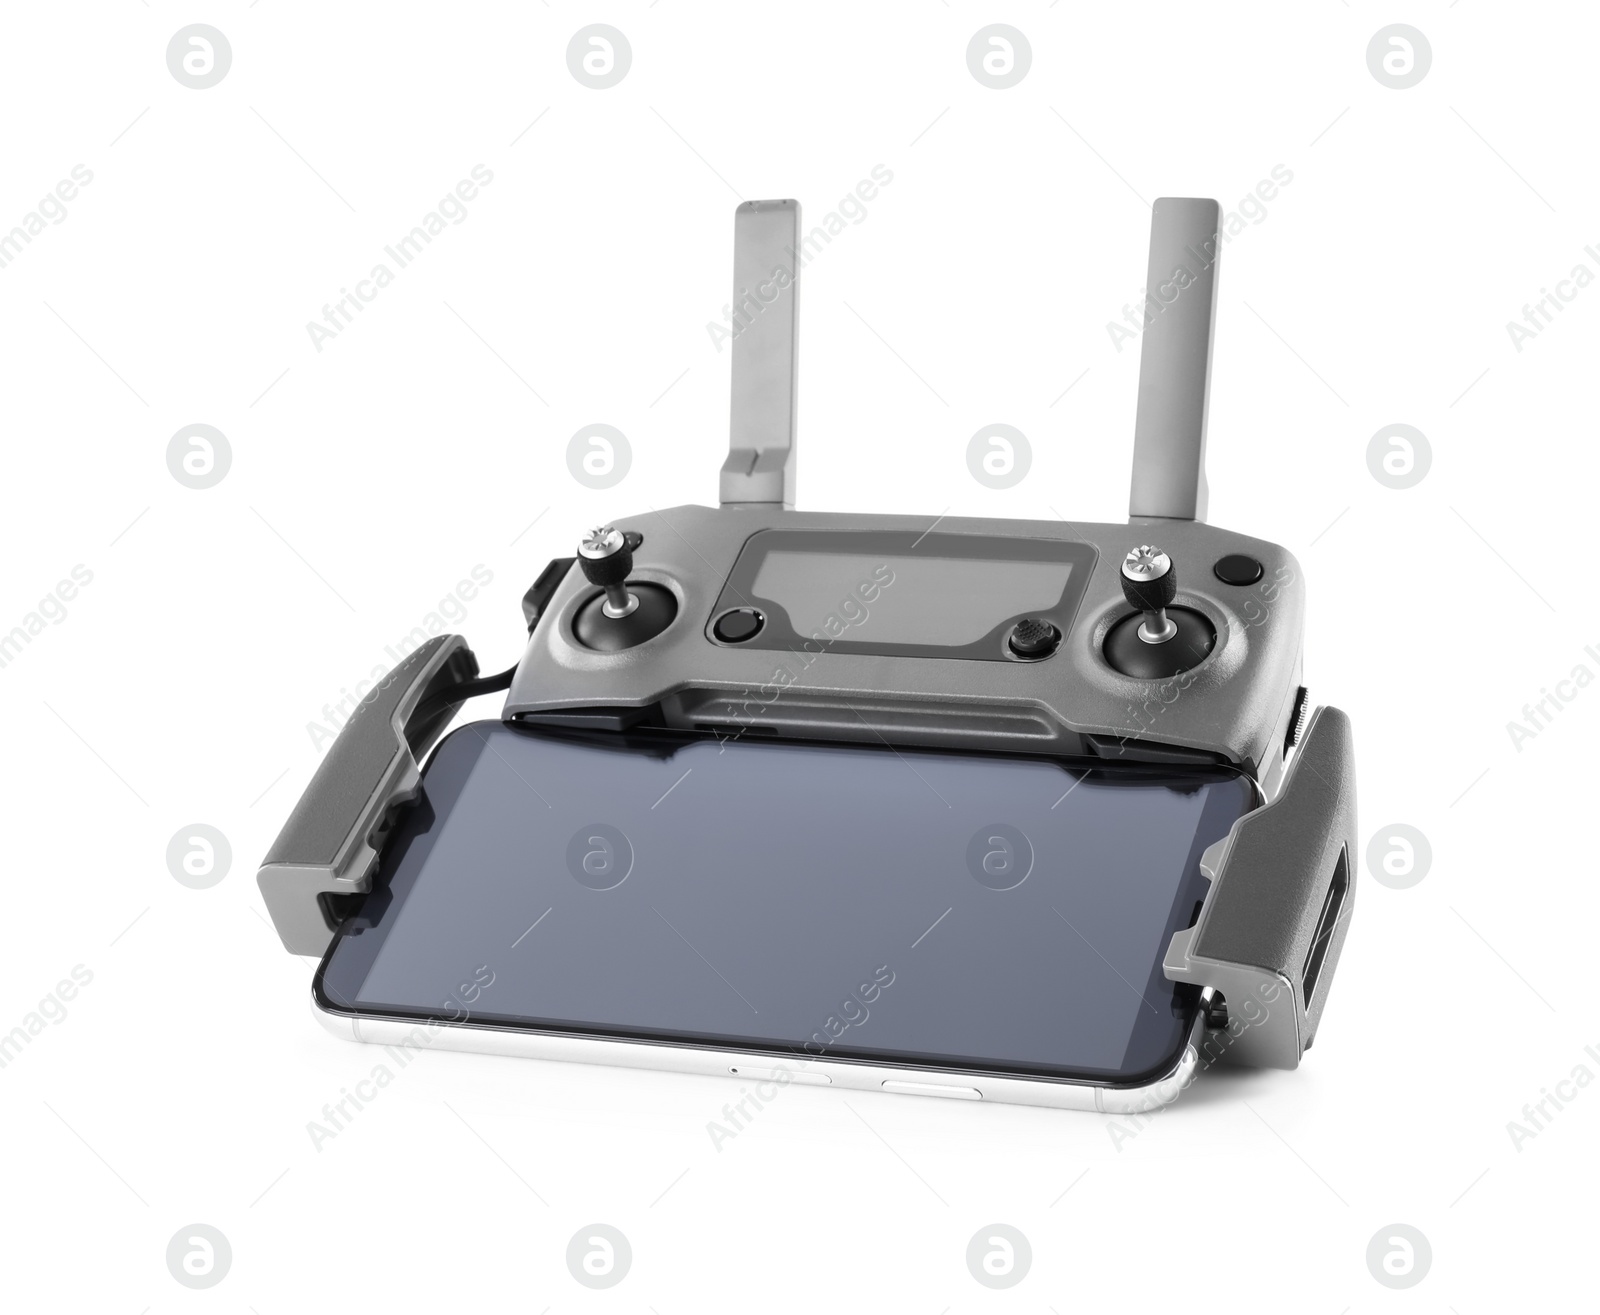 Photo of Drone controller with smartphone isolated on white